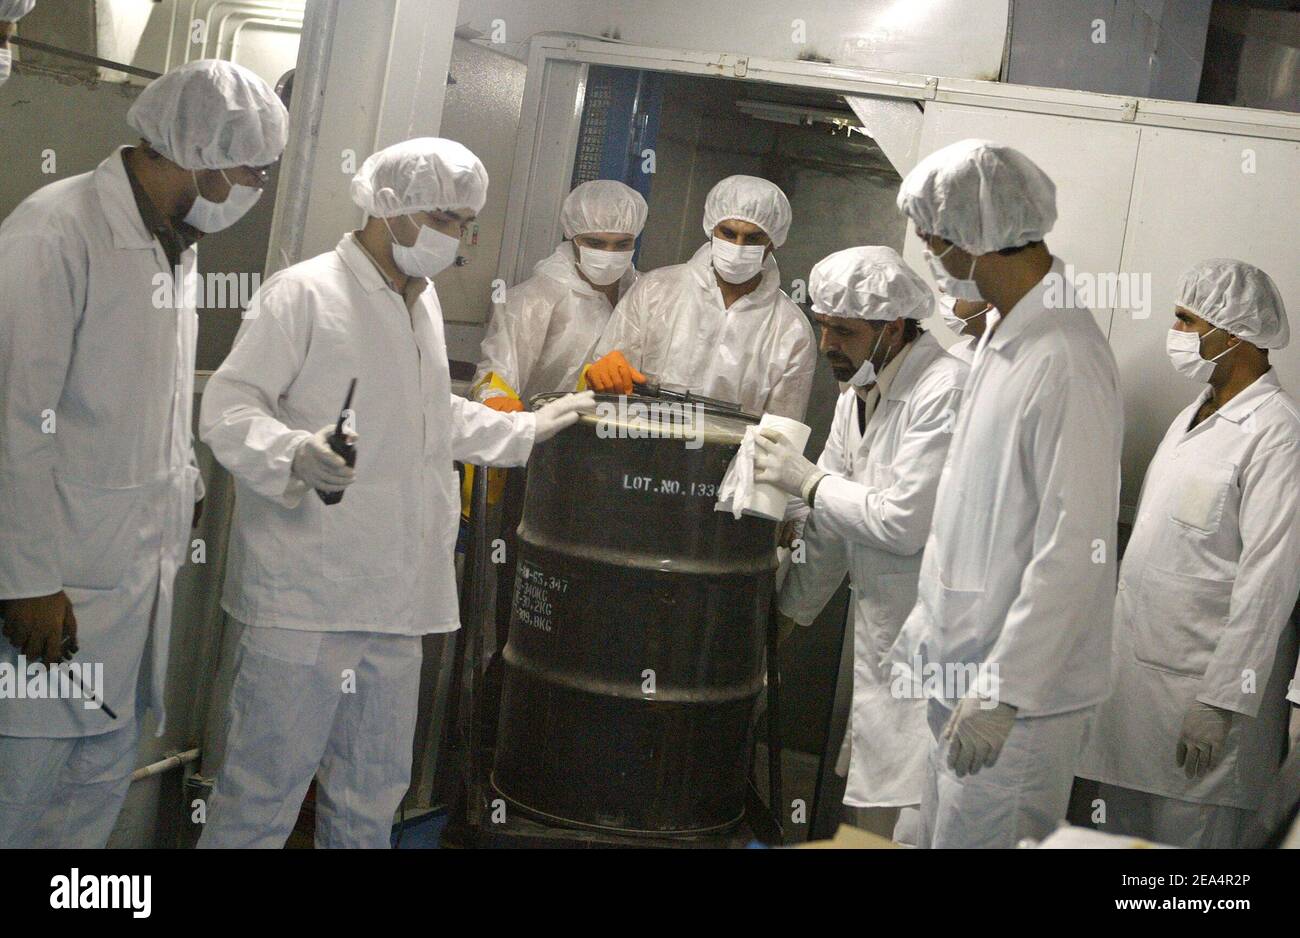 Iranian technicians remove a container of radioactive uranium, 'yellow cake', sealed by the International Atomic Energy Agency, to be used at the Isfahan Uranium Conversion Facilities (UCF), 420 kms south of Tehran, Iran, on August 8, 2005. Iran looked set to resume sensitive nuclear fuel work imminently after the arrival of UN inspectors at a uranium conversion plant. Photo by ABACAPRESS.COM. Stock Photo